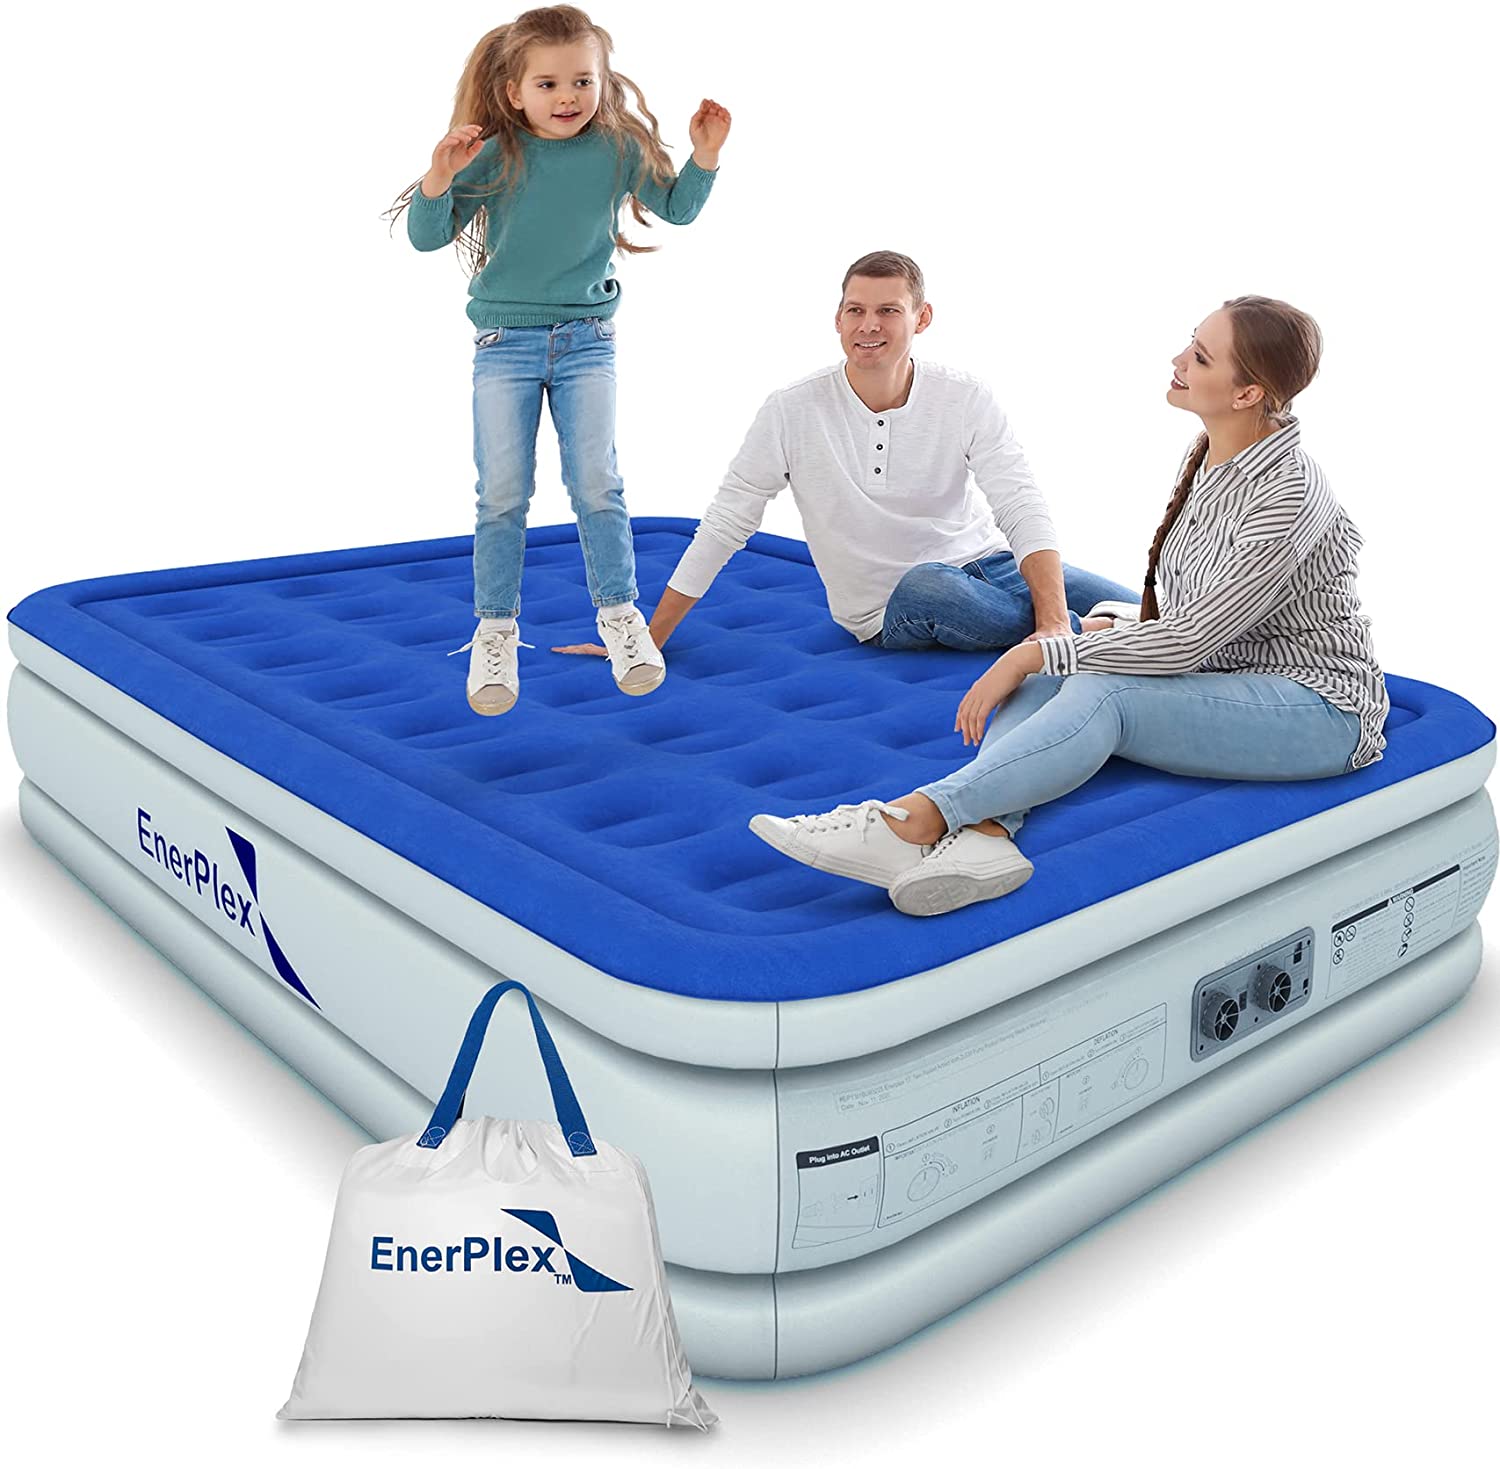 EnerPlex Air Mattress with Built-in Pump - Double Height Inflatable Mattress for Camping, Home & Portable Travel - Queen, 13 Inch - image 1 of 10